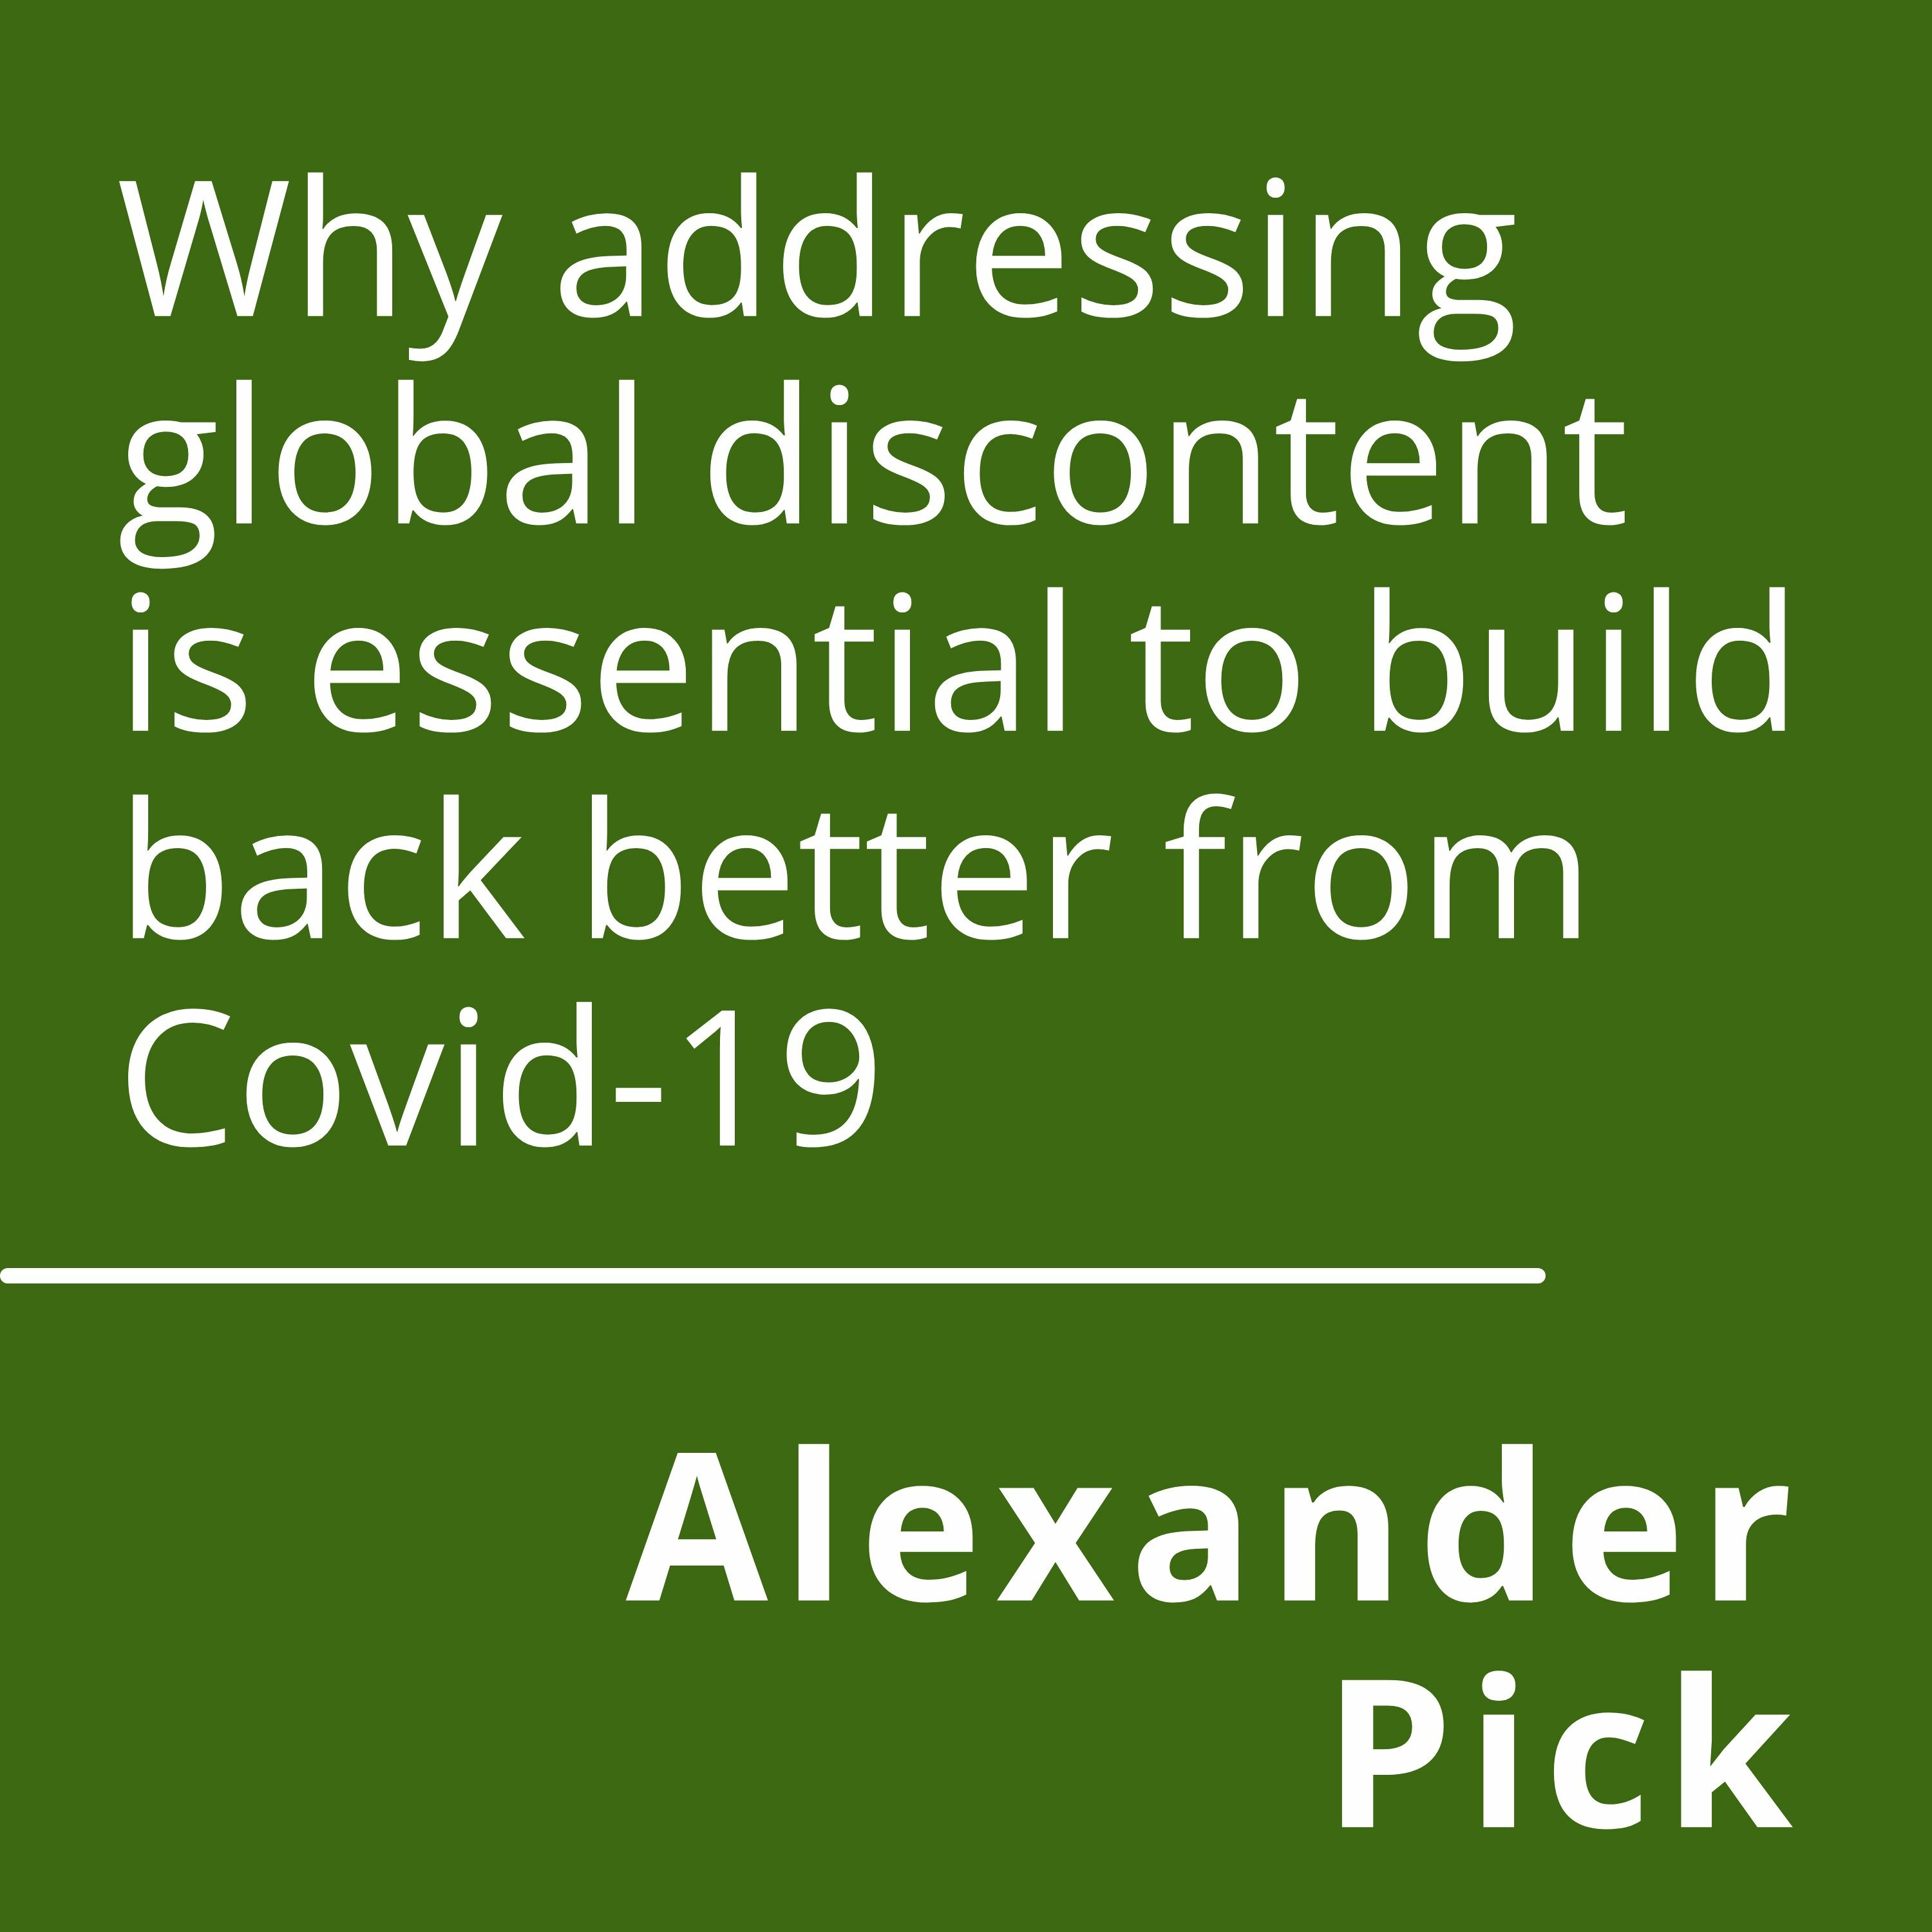 Why addressing global discontent is essential to build back better from Covid-19 with Alexander Pick